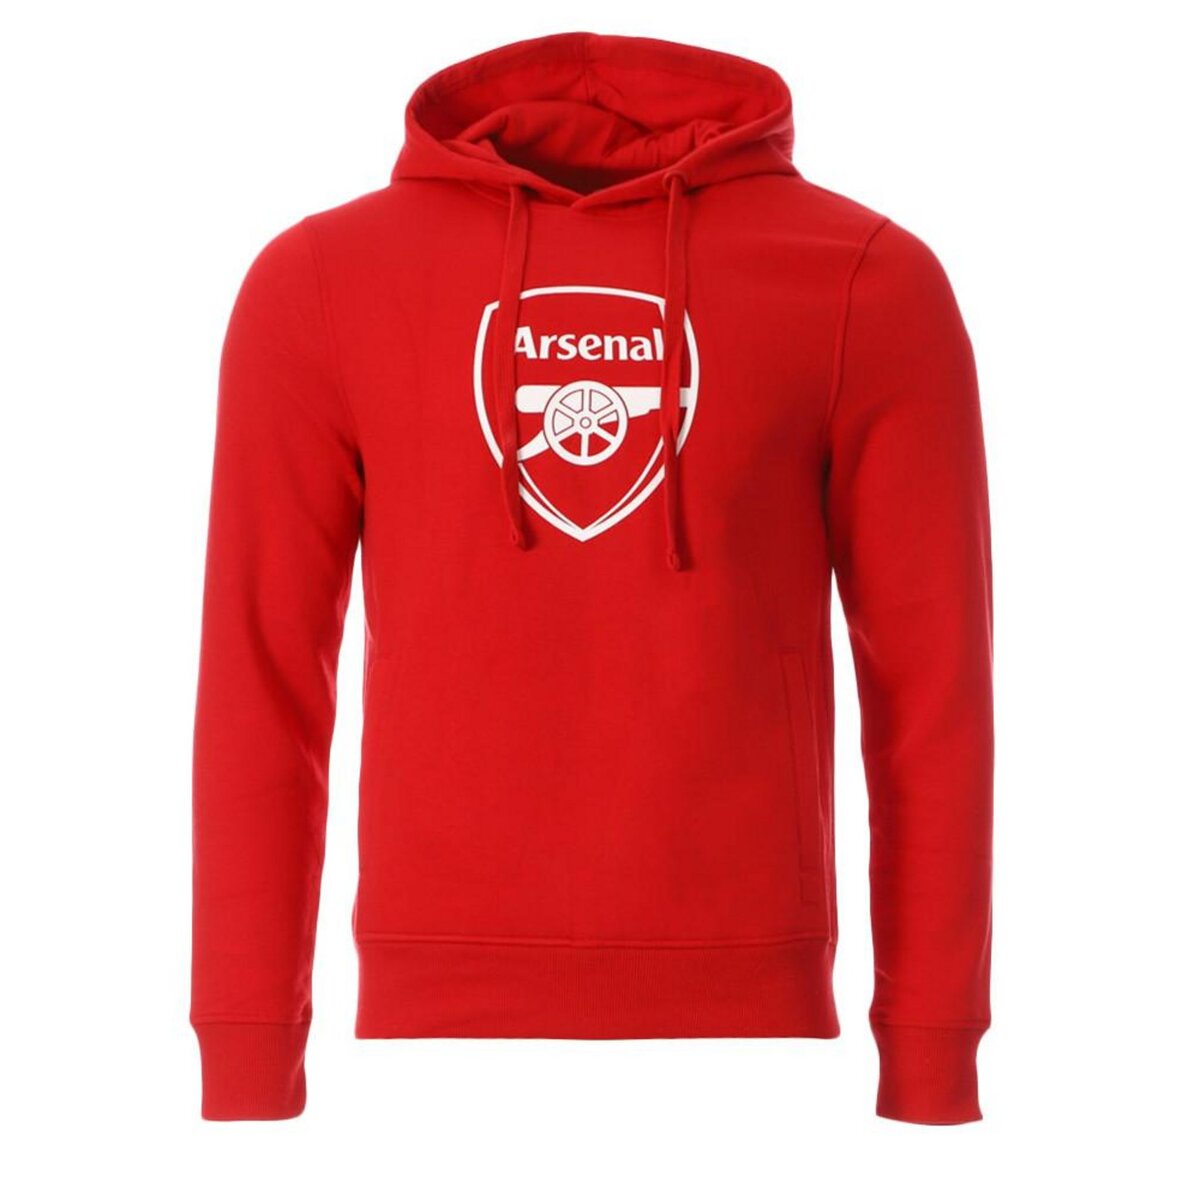  Sweat capuche Rouge Homme Arsenal Ho01